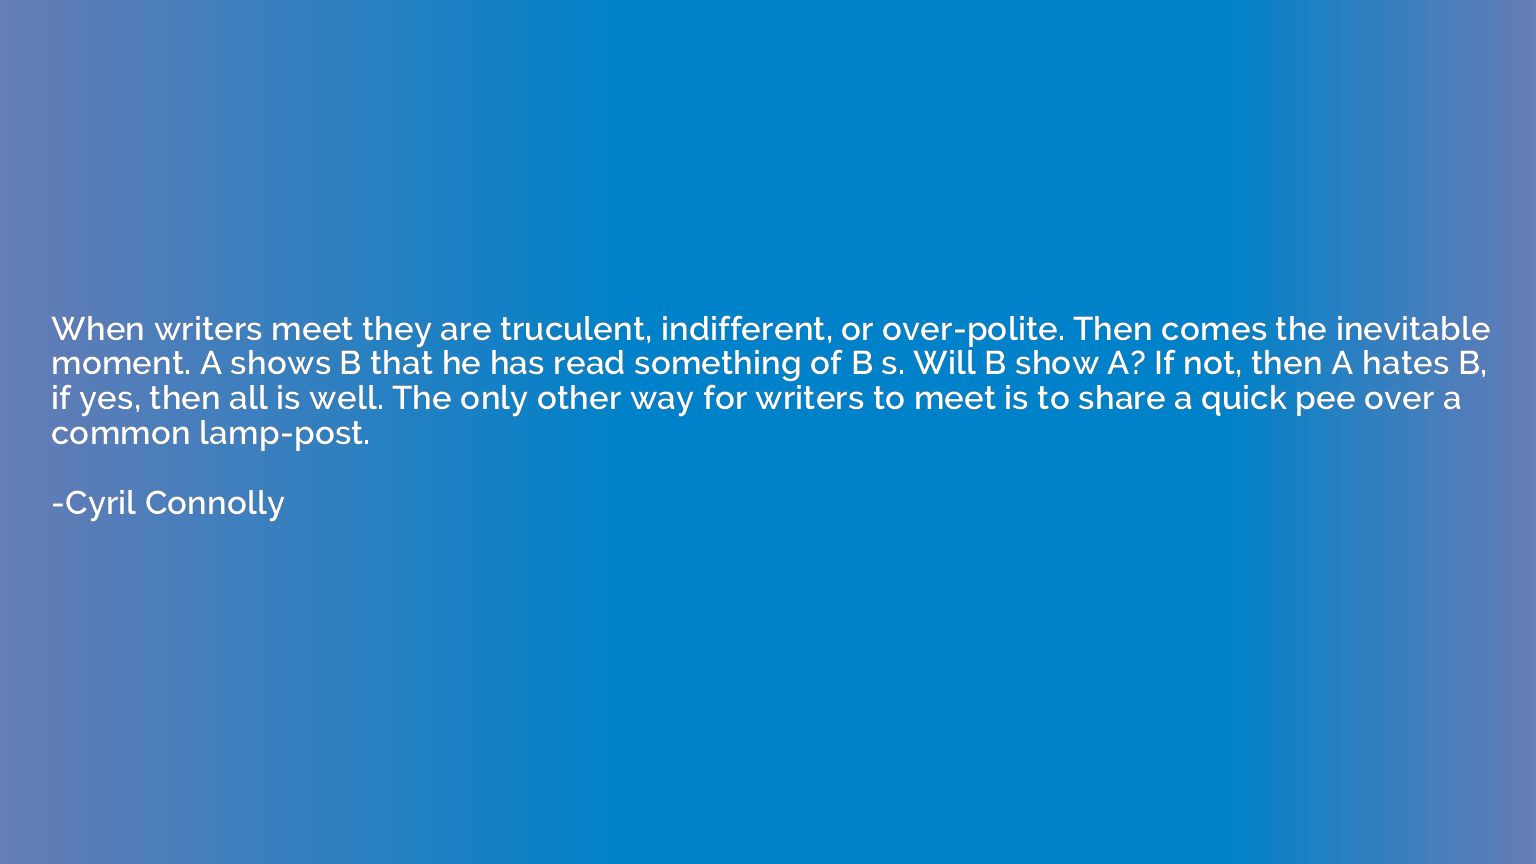 When writers meet they are truculent, indifferent, or over-p